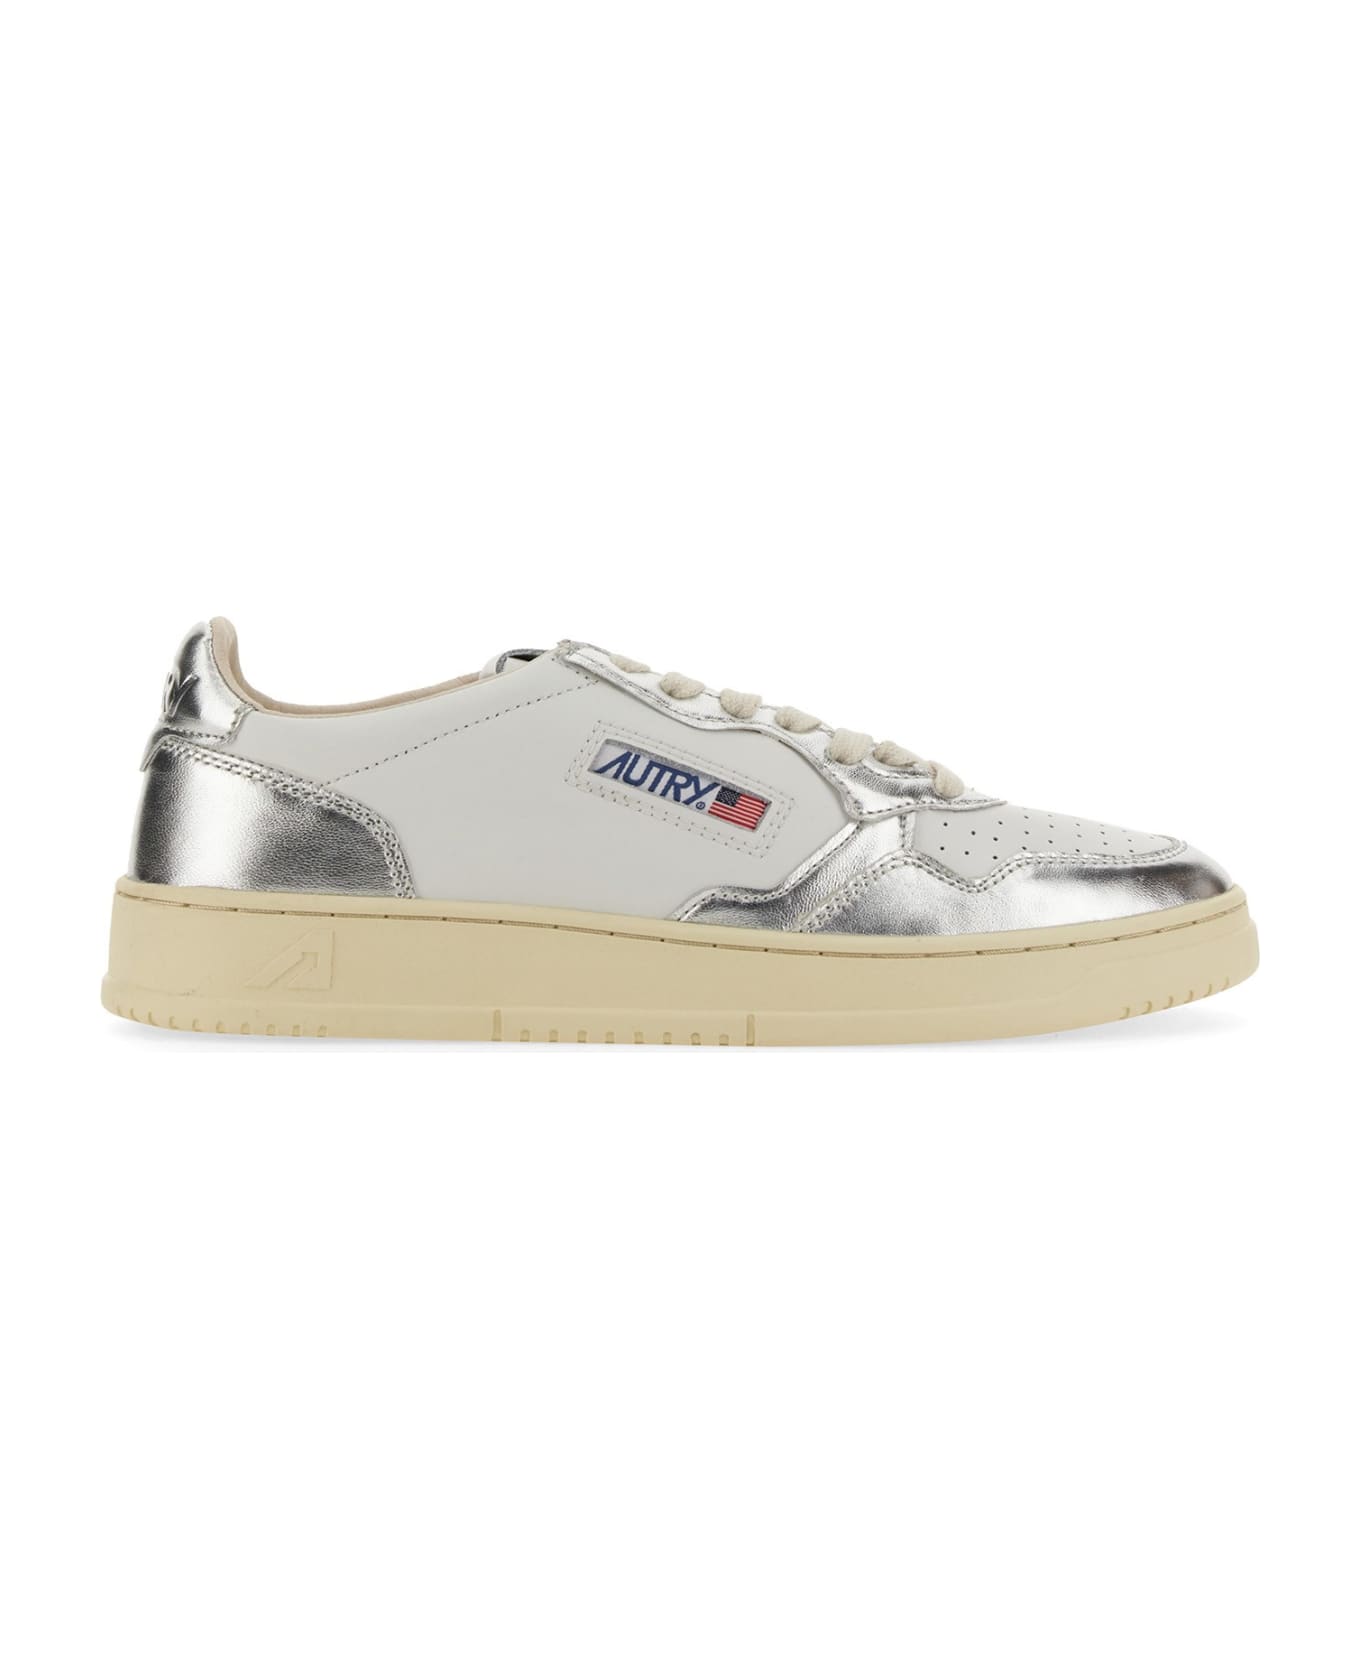 Autry Medalist Low Sneakers - White/silver